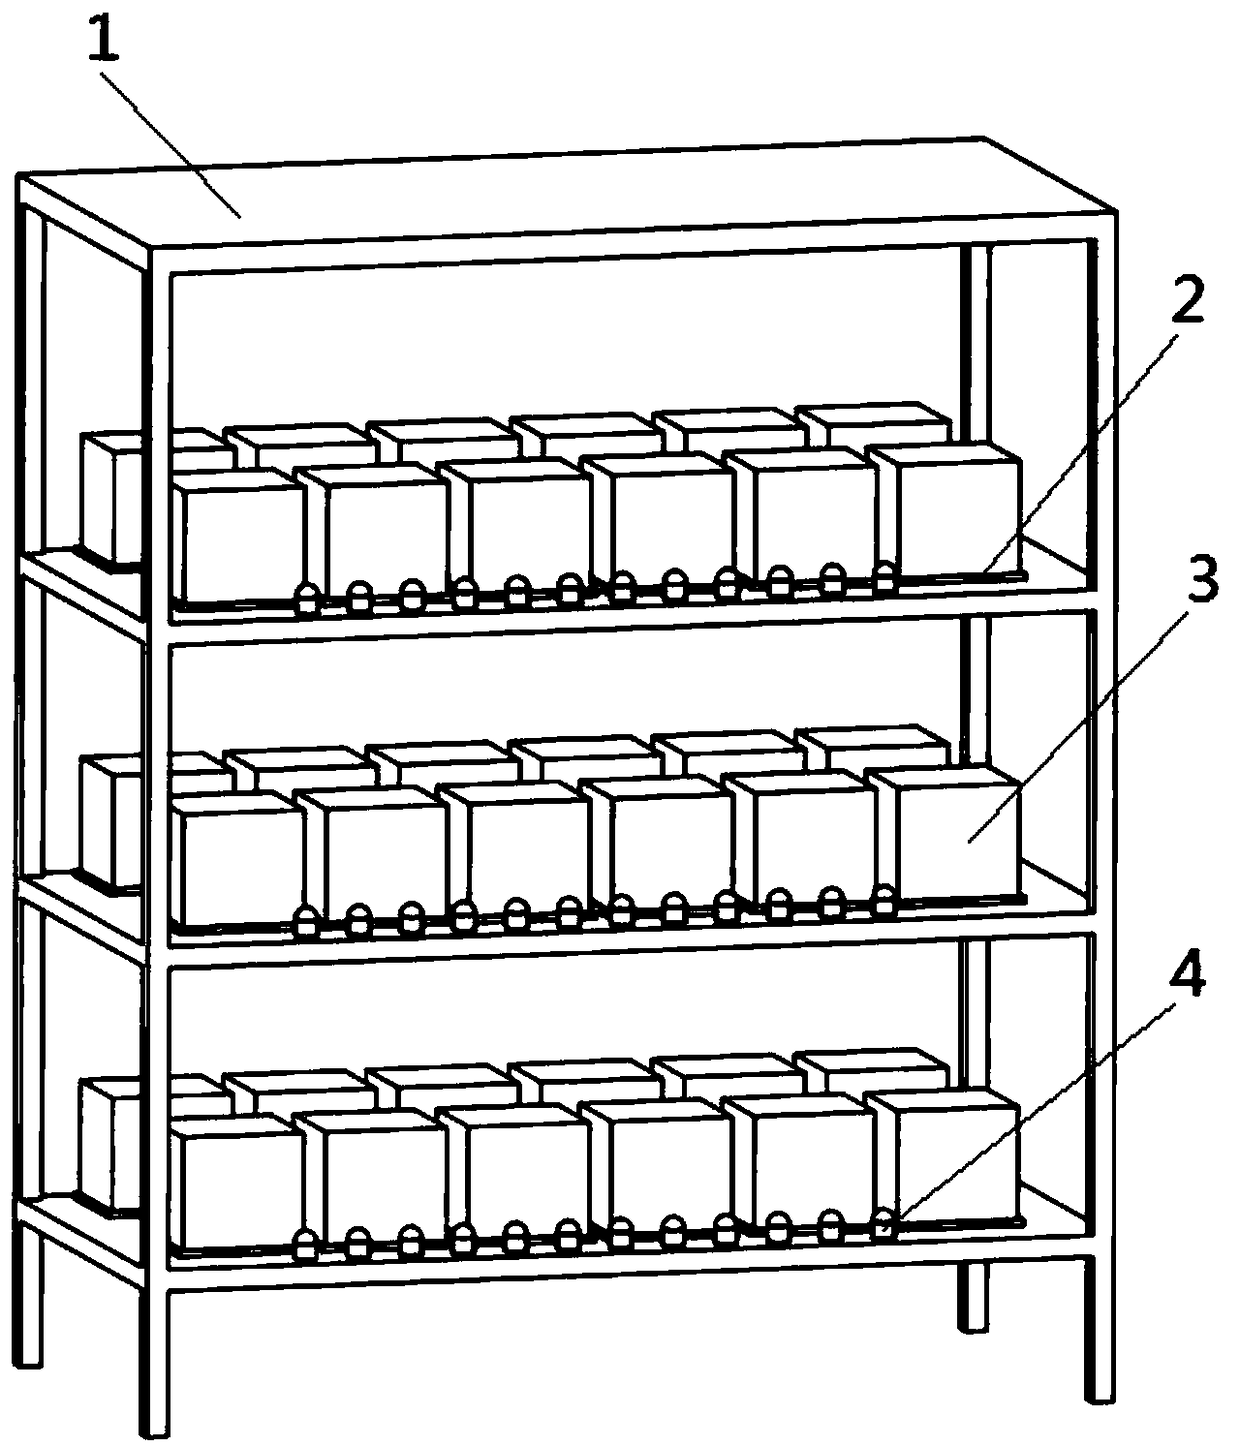 Construction engineering intelligent standard-cured and co-cured test block management storage rack